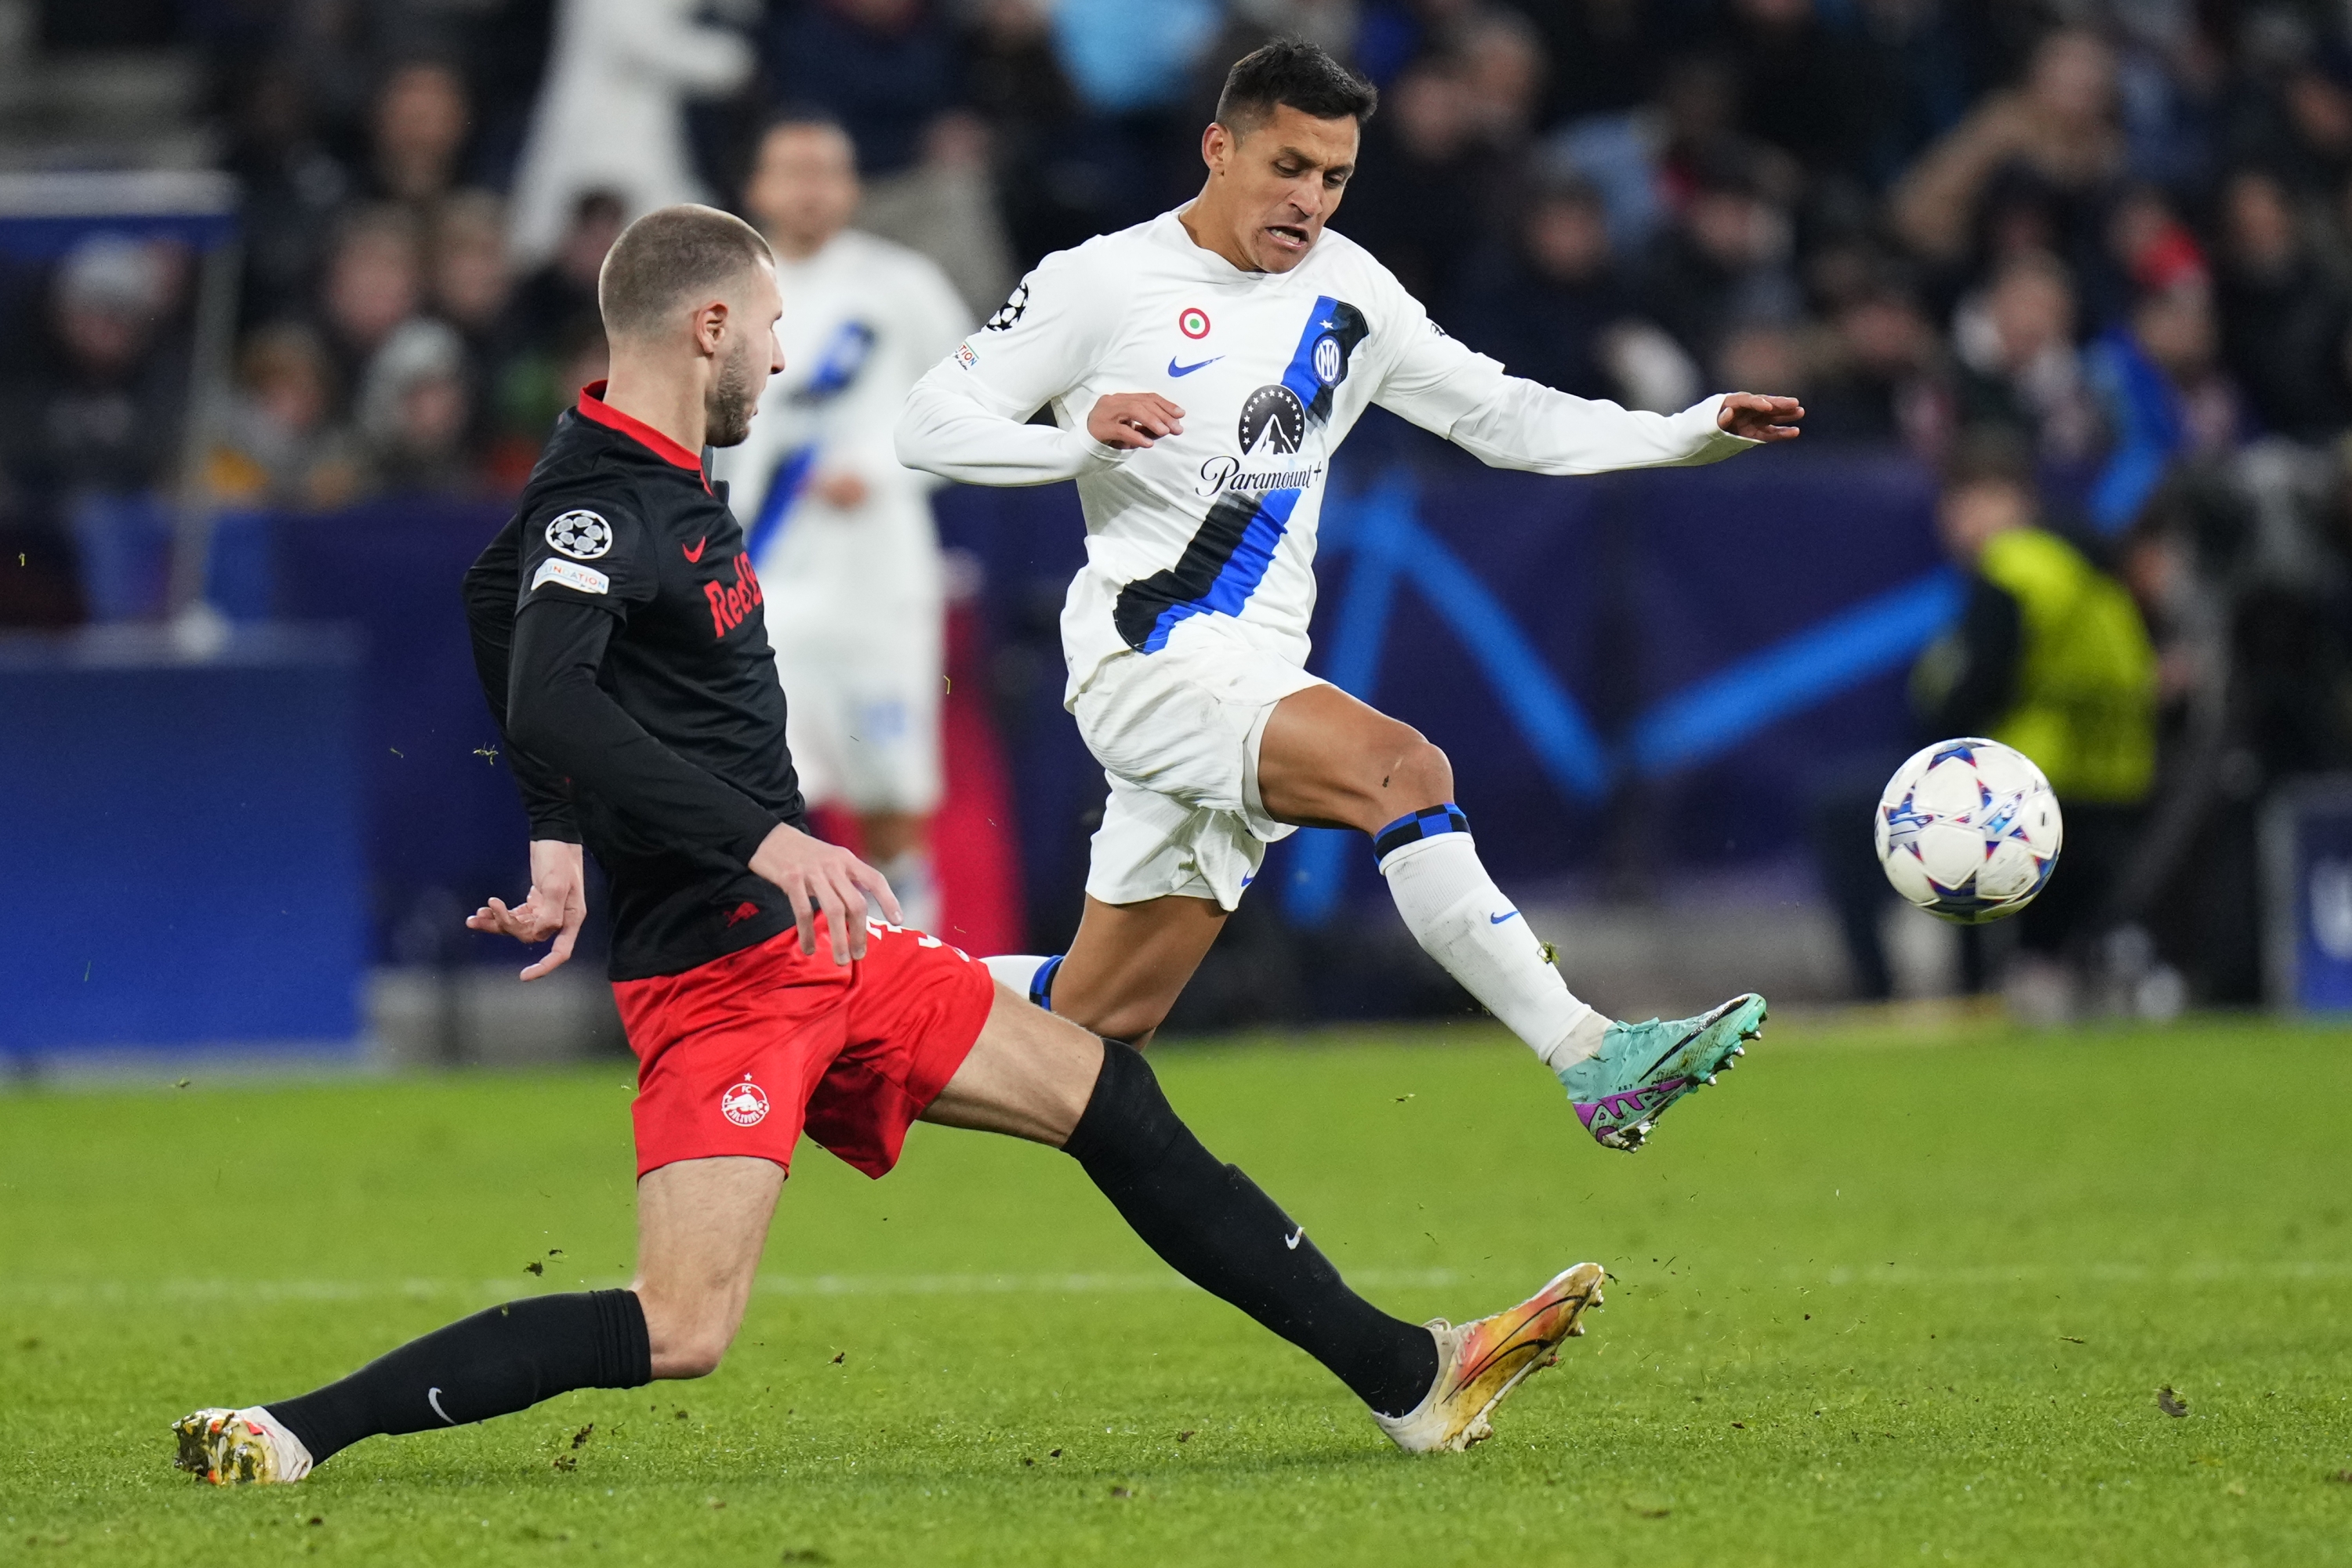 Inter Milan's Alexis Sanchez, right, is challenged by Salzburg's Strahinja Pavlovic during the group D Champions League soccer match between Salzburg and Inter Milan in Salzburg, Austria, Wednesday, Nov. 8, 2023. (AP Photo/Petr David Josek)